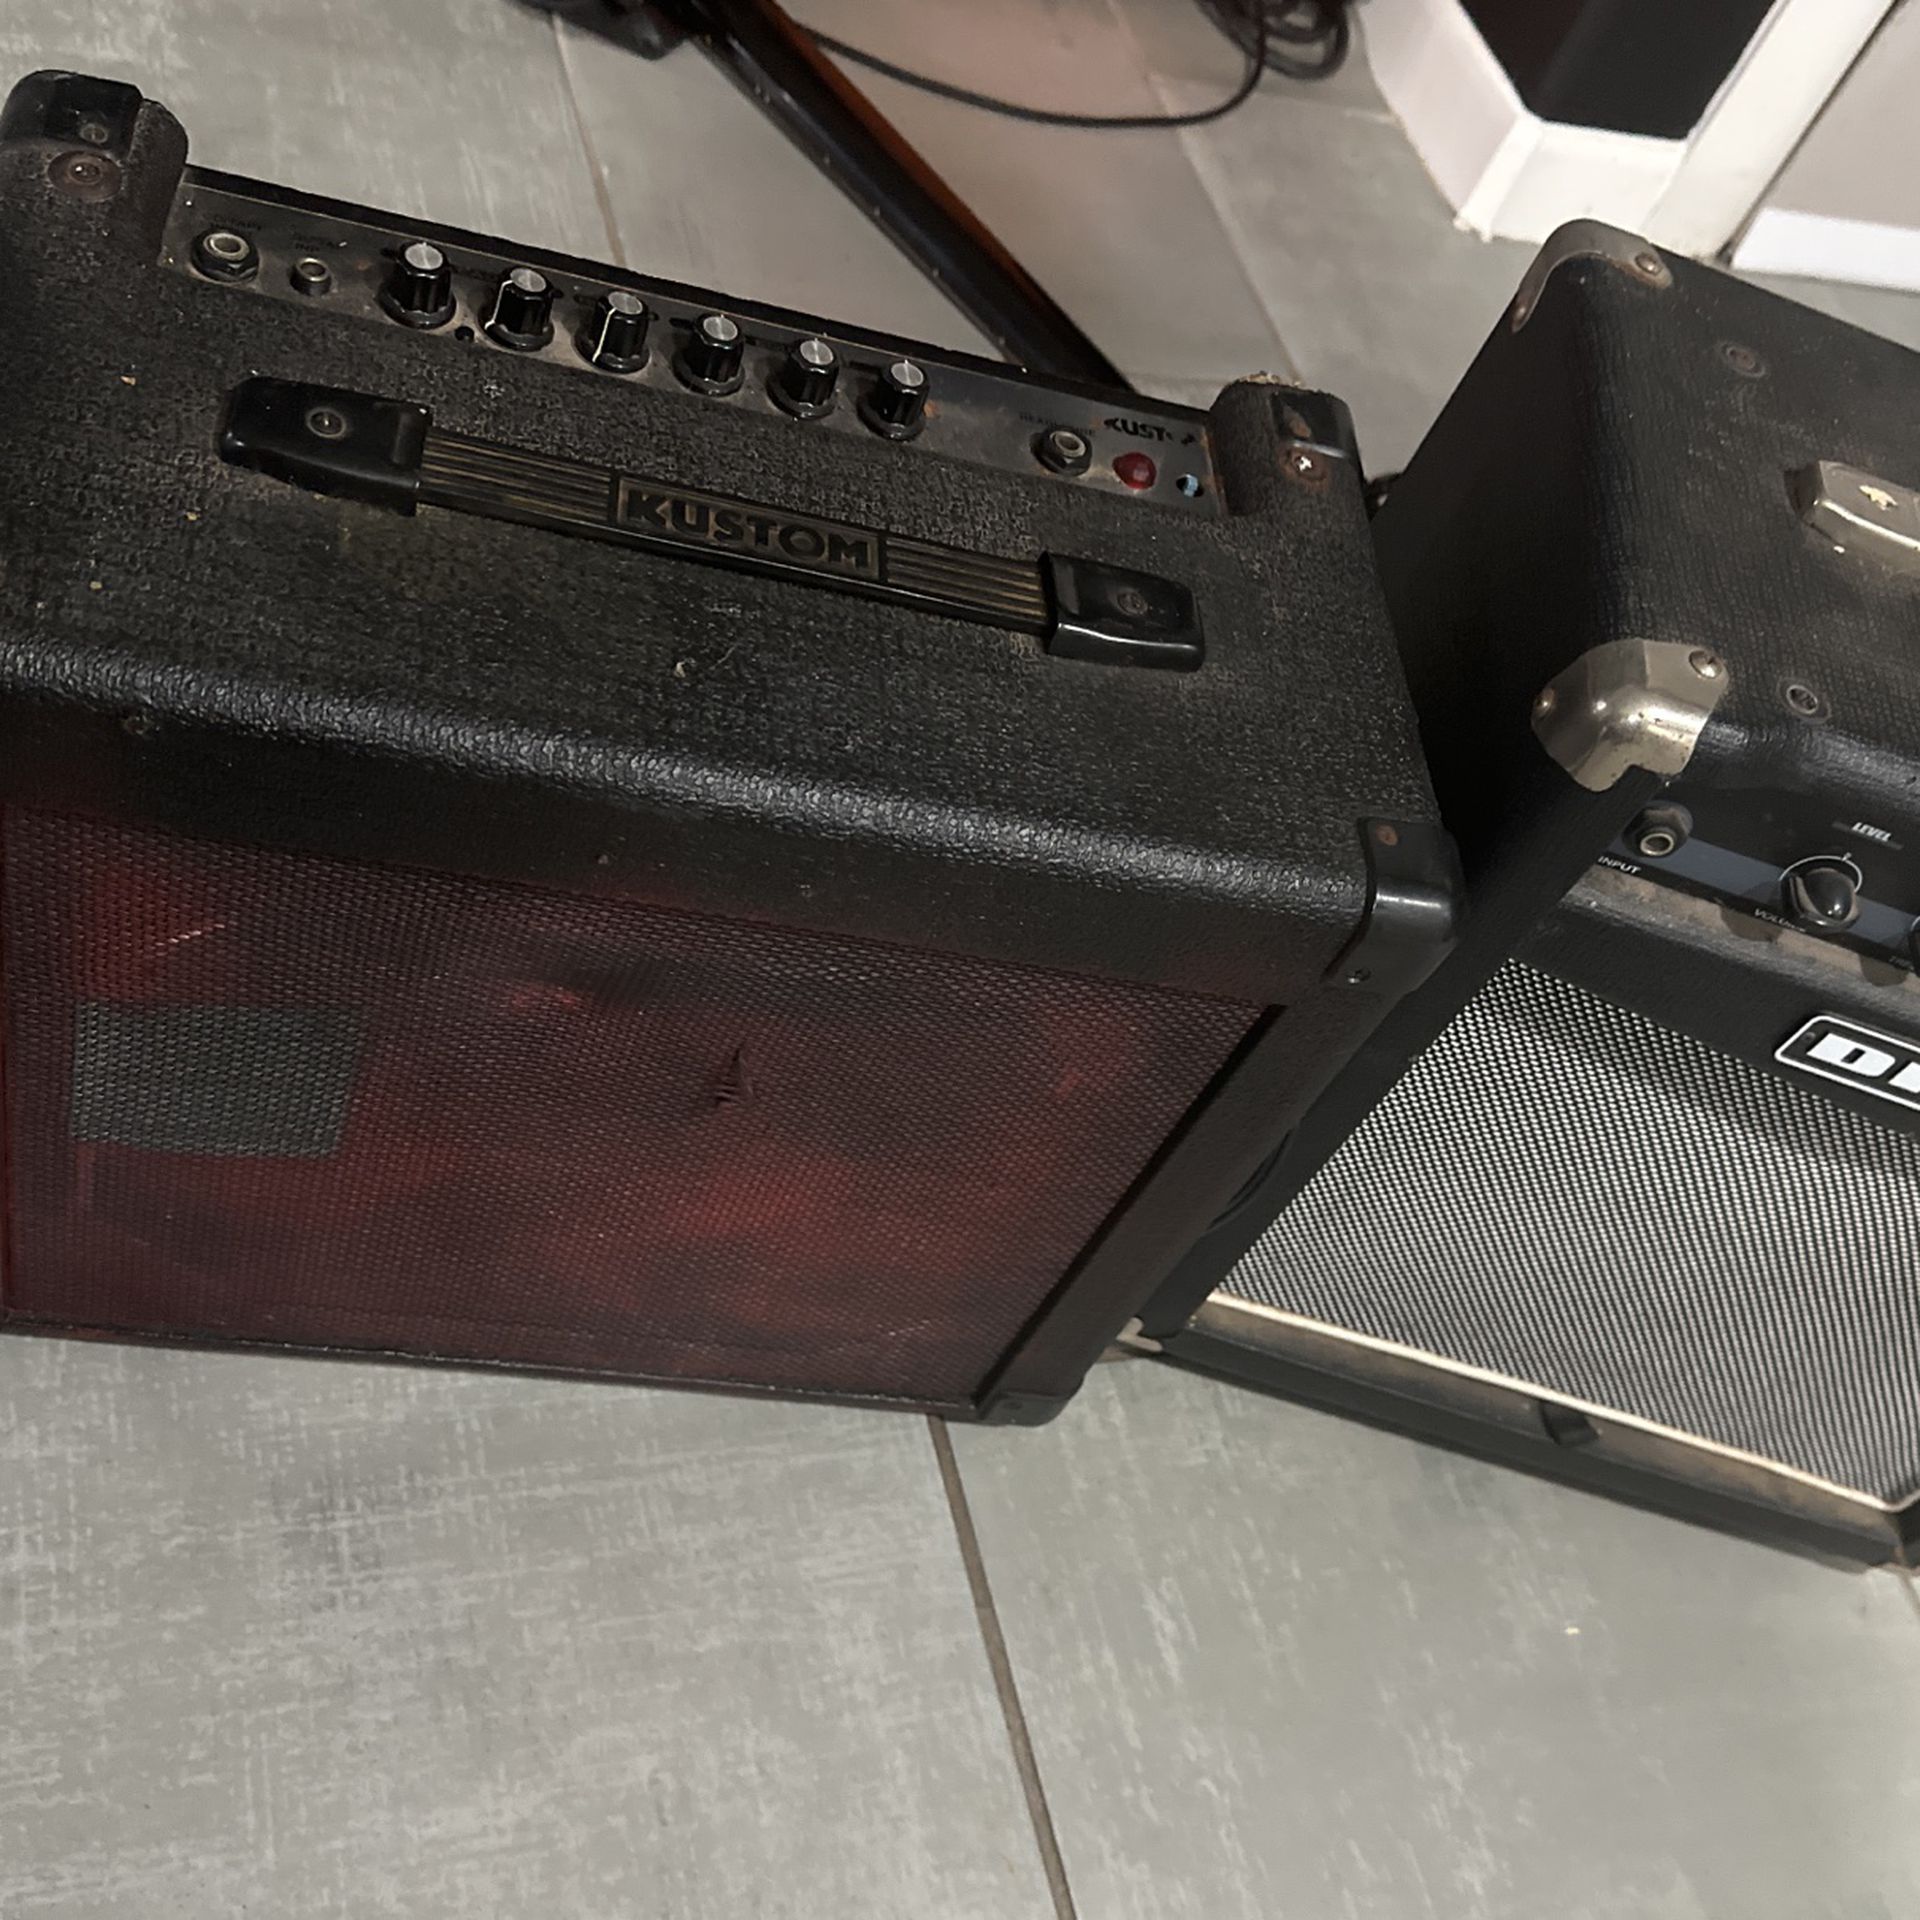 Solid State Guitar Amp And Solid State Bass Amp 